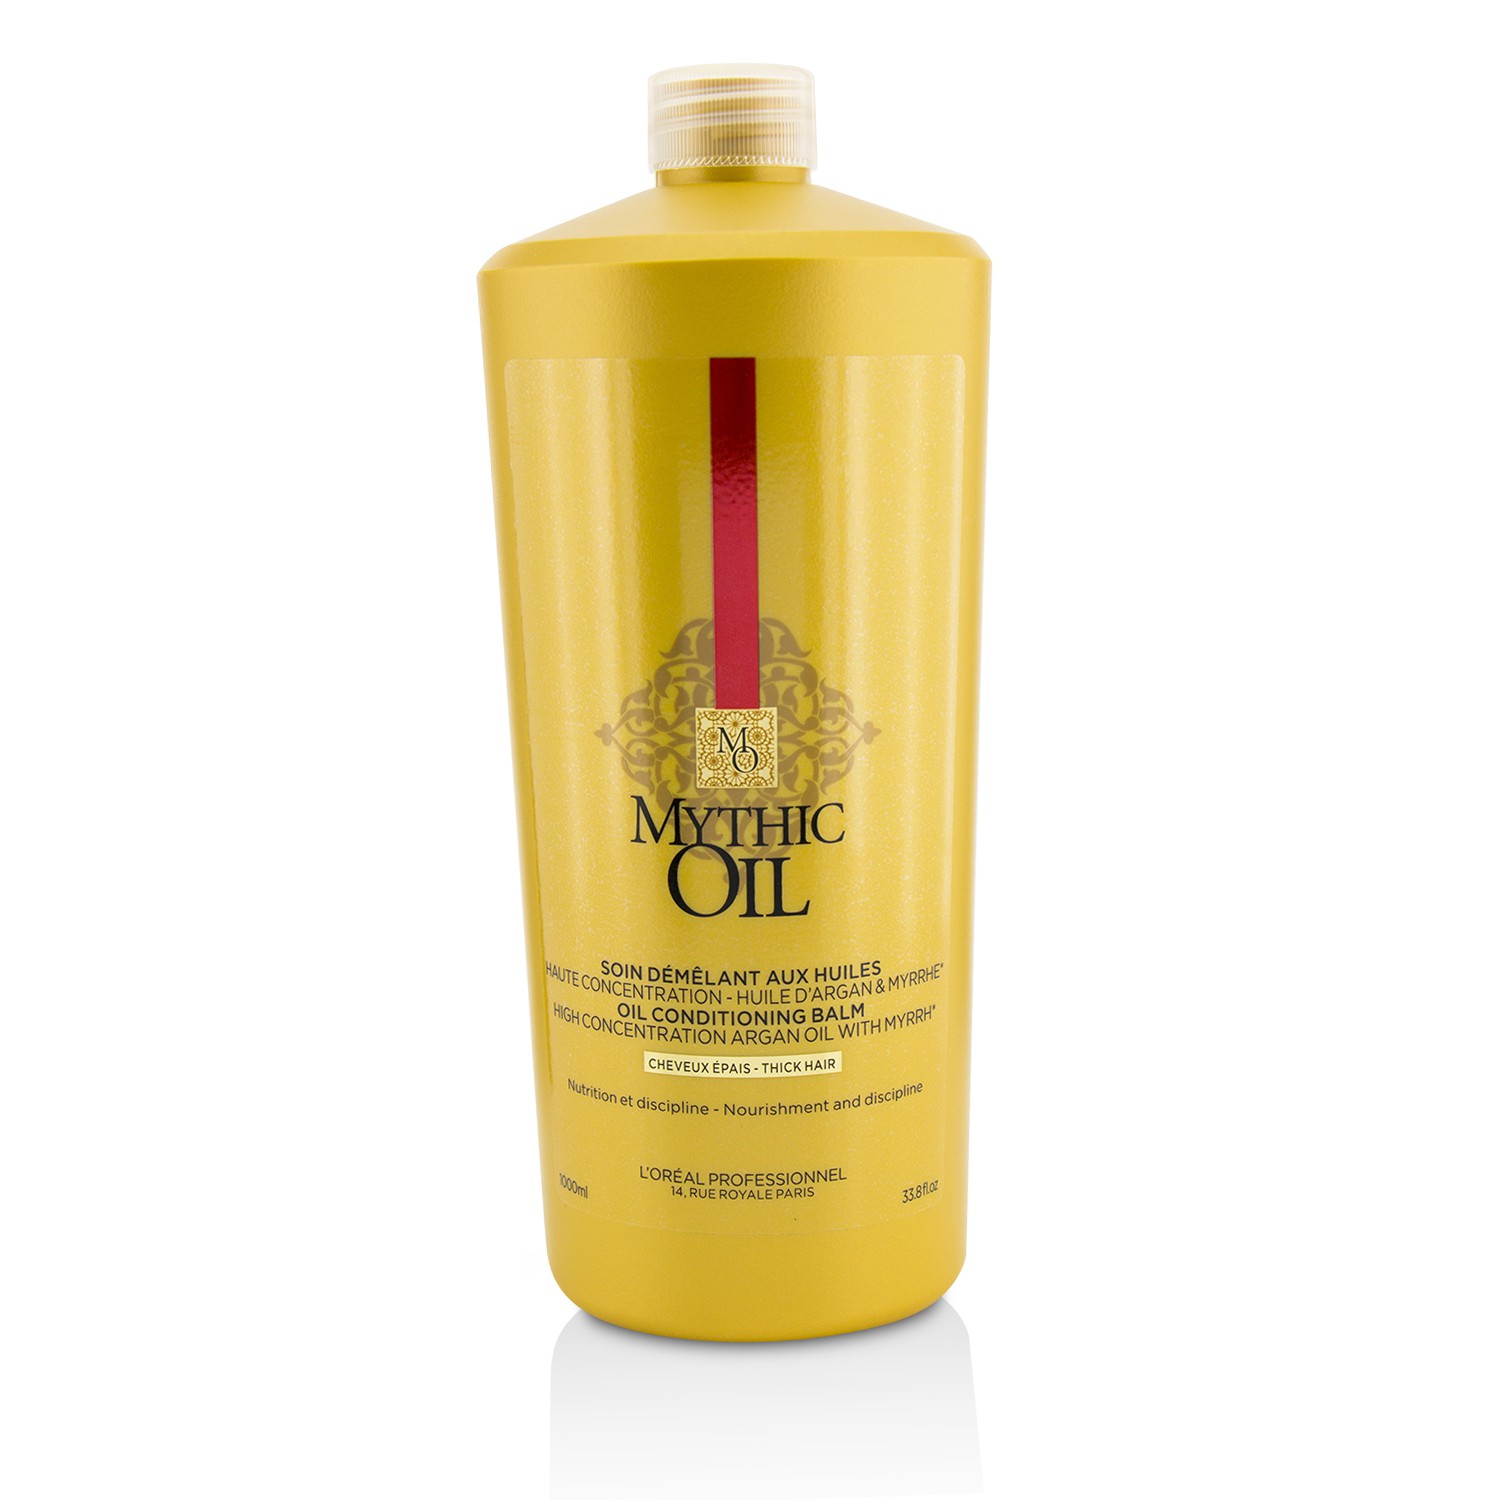 Professionnel Mythic Oil Oil Conditioning Balm (Thick Hair) LOreal Image